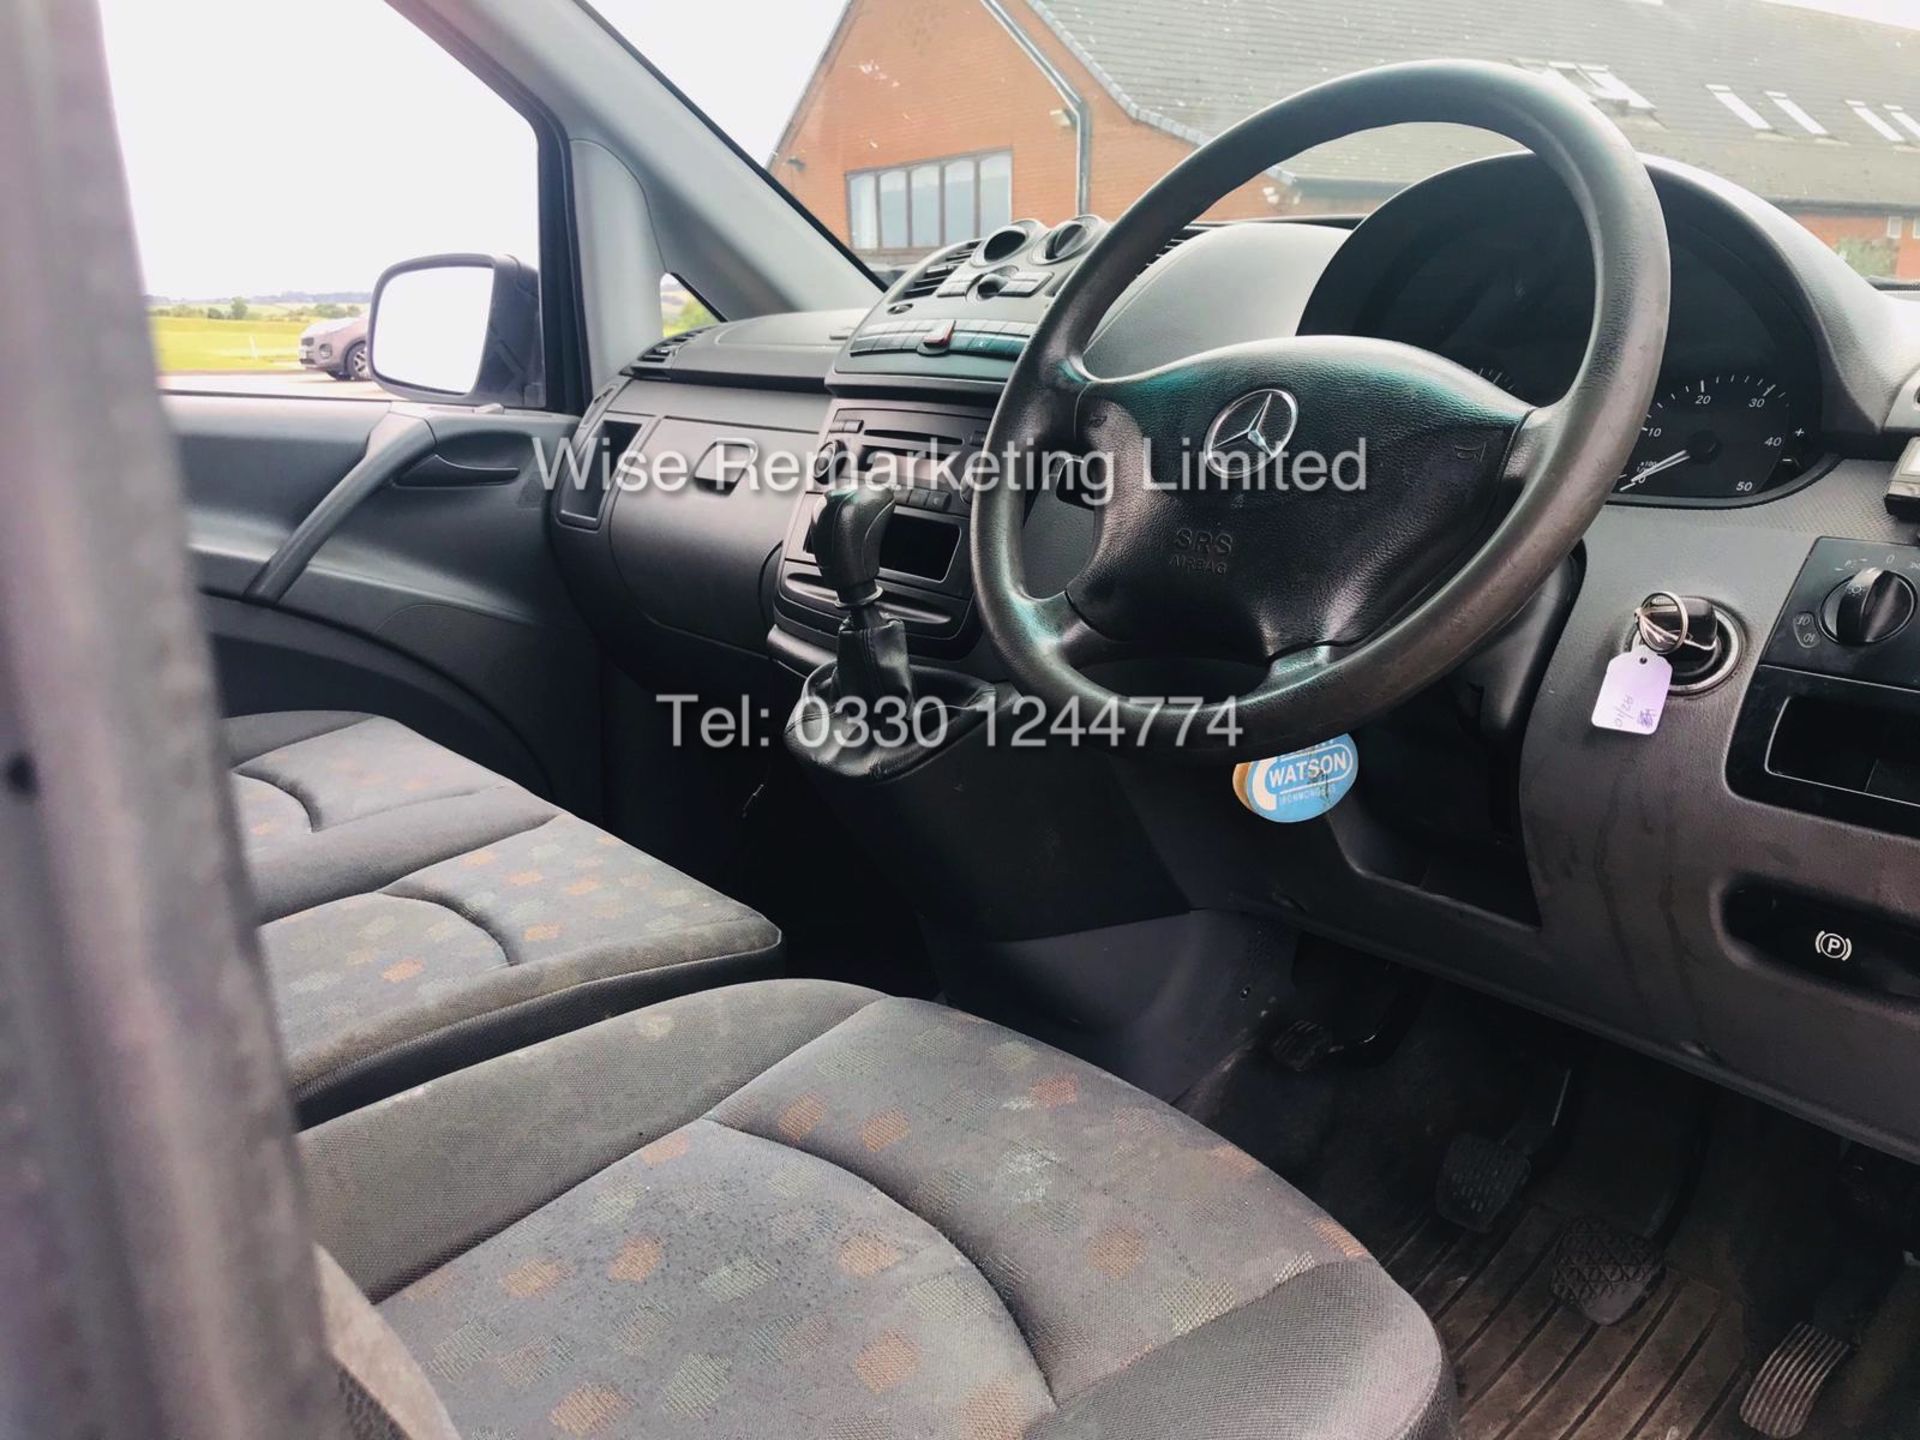 MERCEDES VITO 109 2.1 CDI LONG (2010 MODEL) 3 SEATER *SAVE 20%* - Image 18 of 20